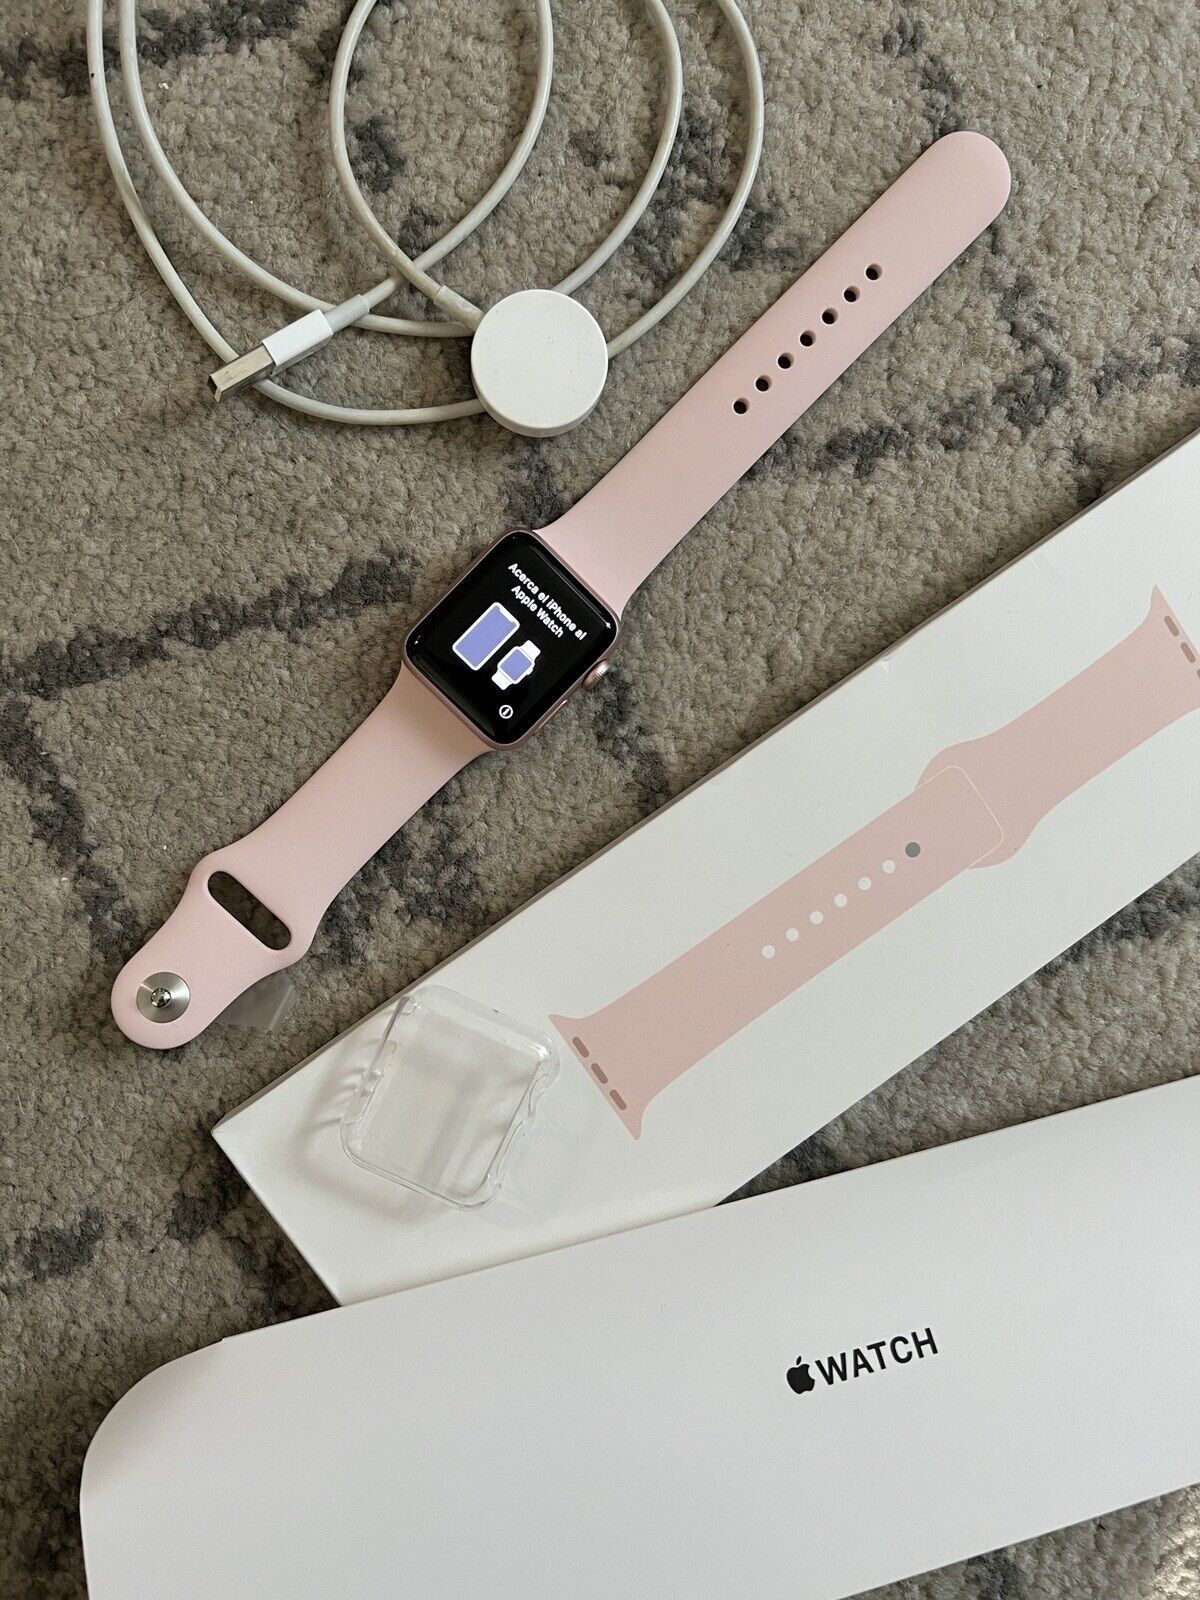 APPLE WATCH LOT Series 2 38mm Rose Gold Pink + New pink bands, screen protector Apple MNNY2LL/A